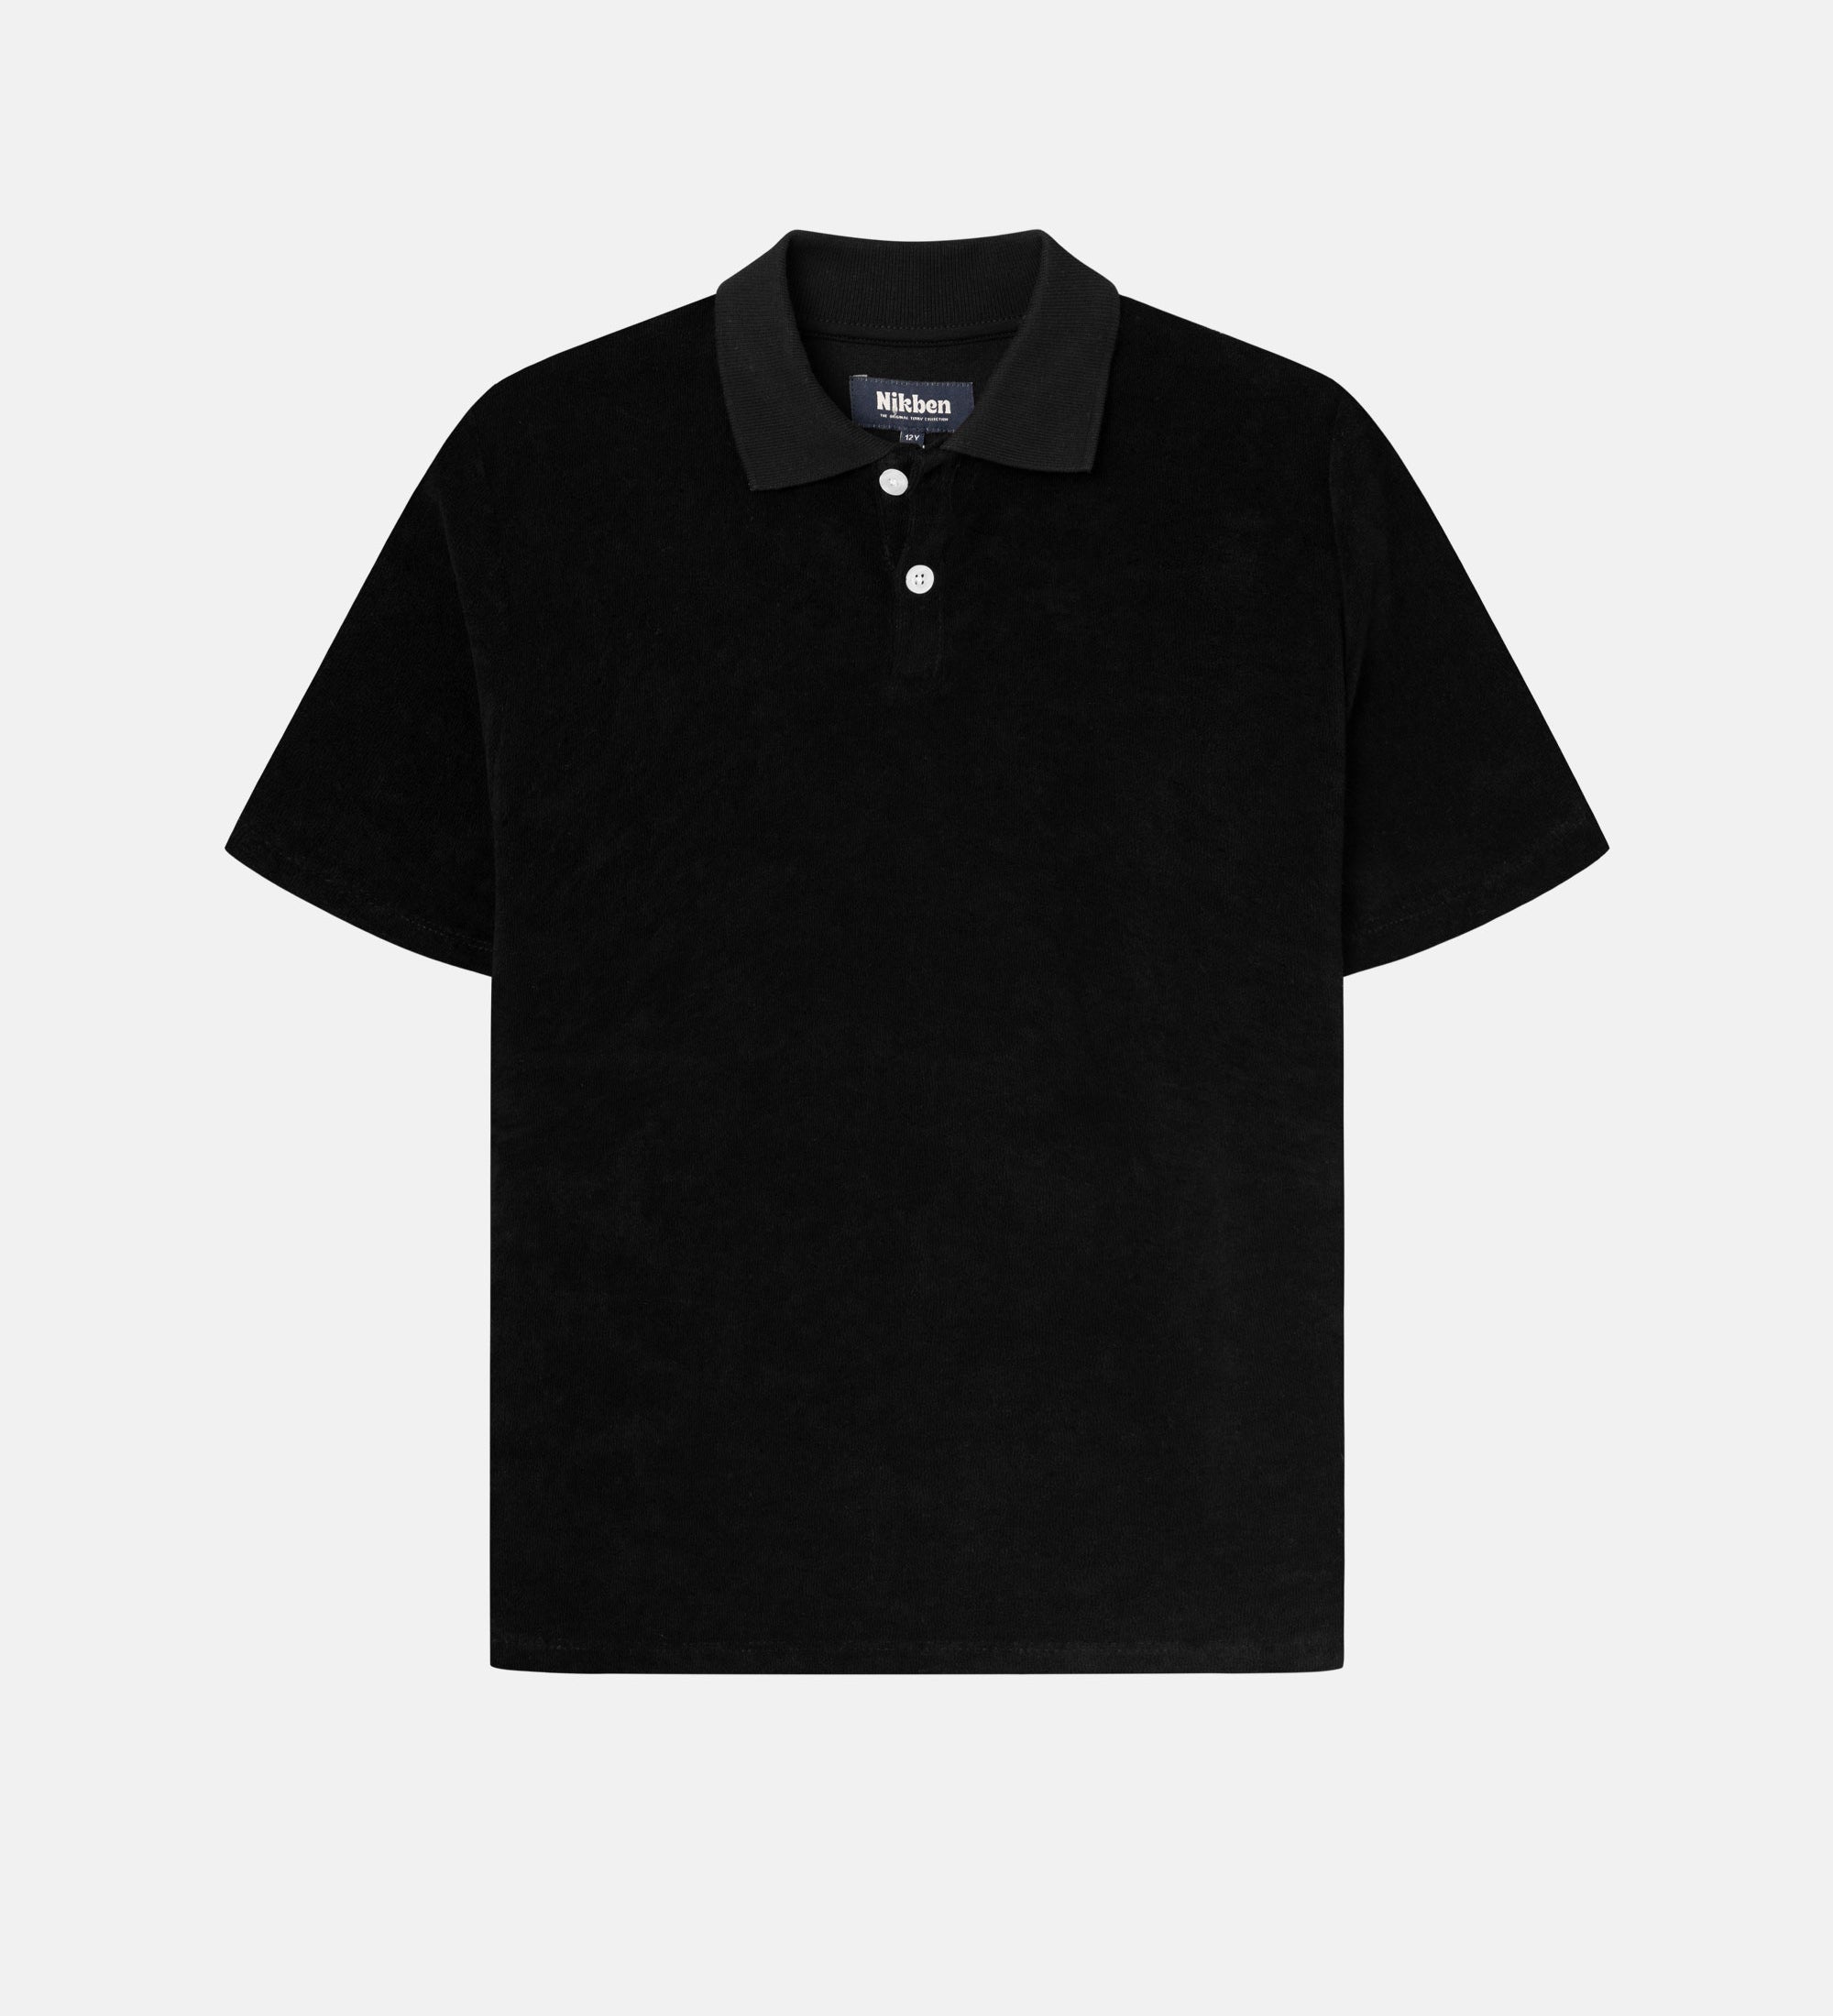 Black short sleeve piké shirt for kids in terry toweling fabric.